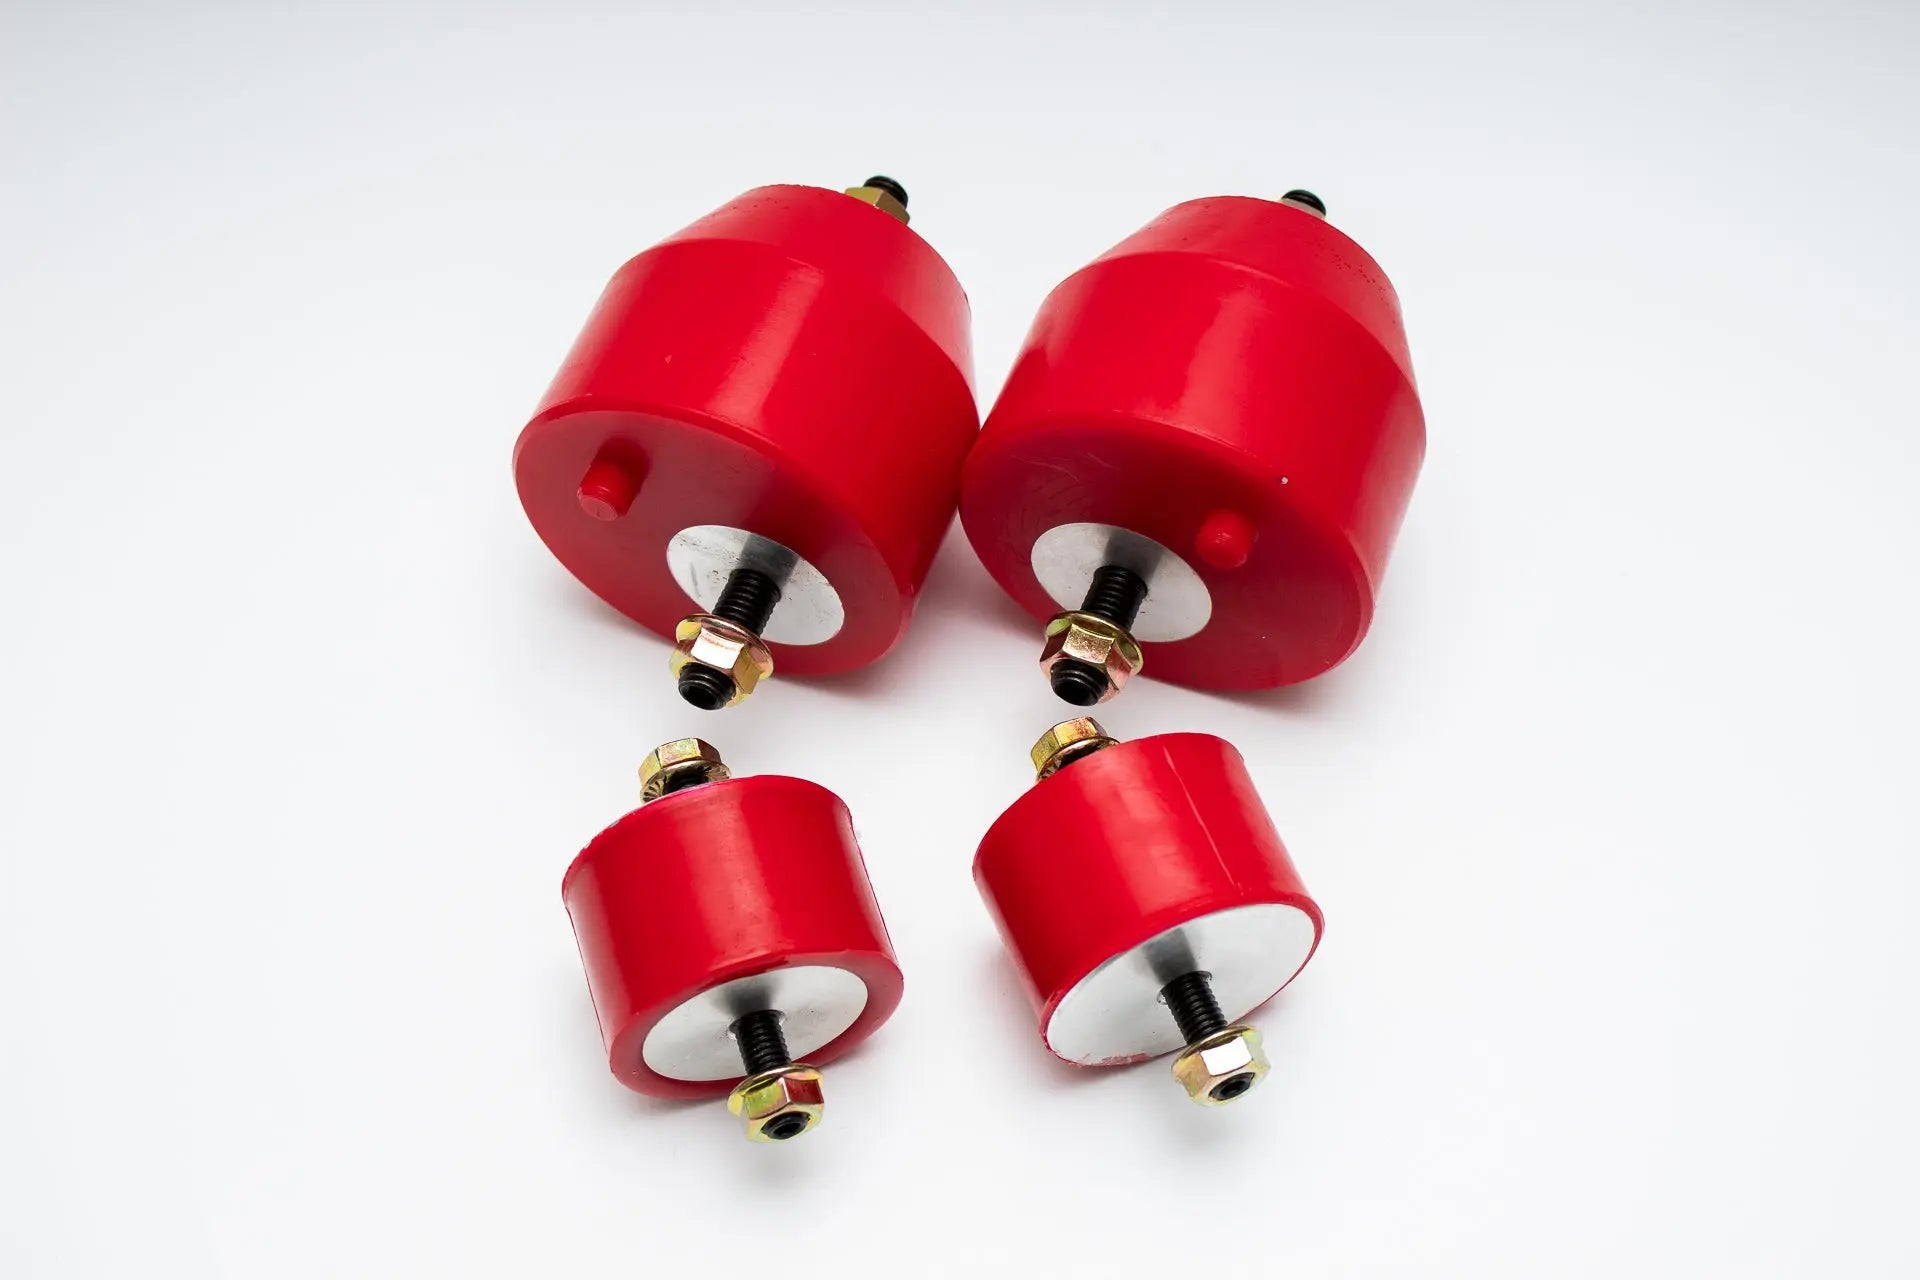 E36 E46 Z3 Z4 Polyurethane Motor and Transmission Mount Kit - RED  High  Quality Automotive Performance Parts and Accessories. Competitive Pricing,  Great Customer Service.